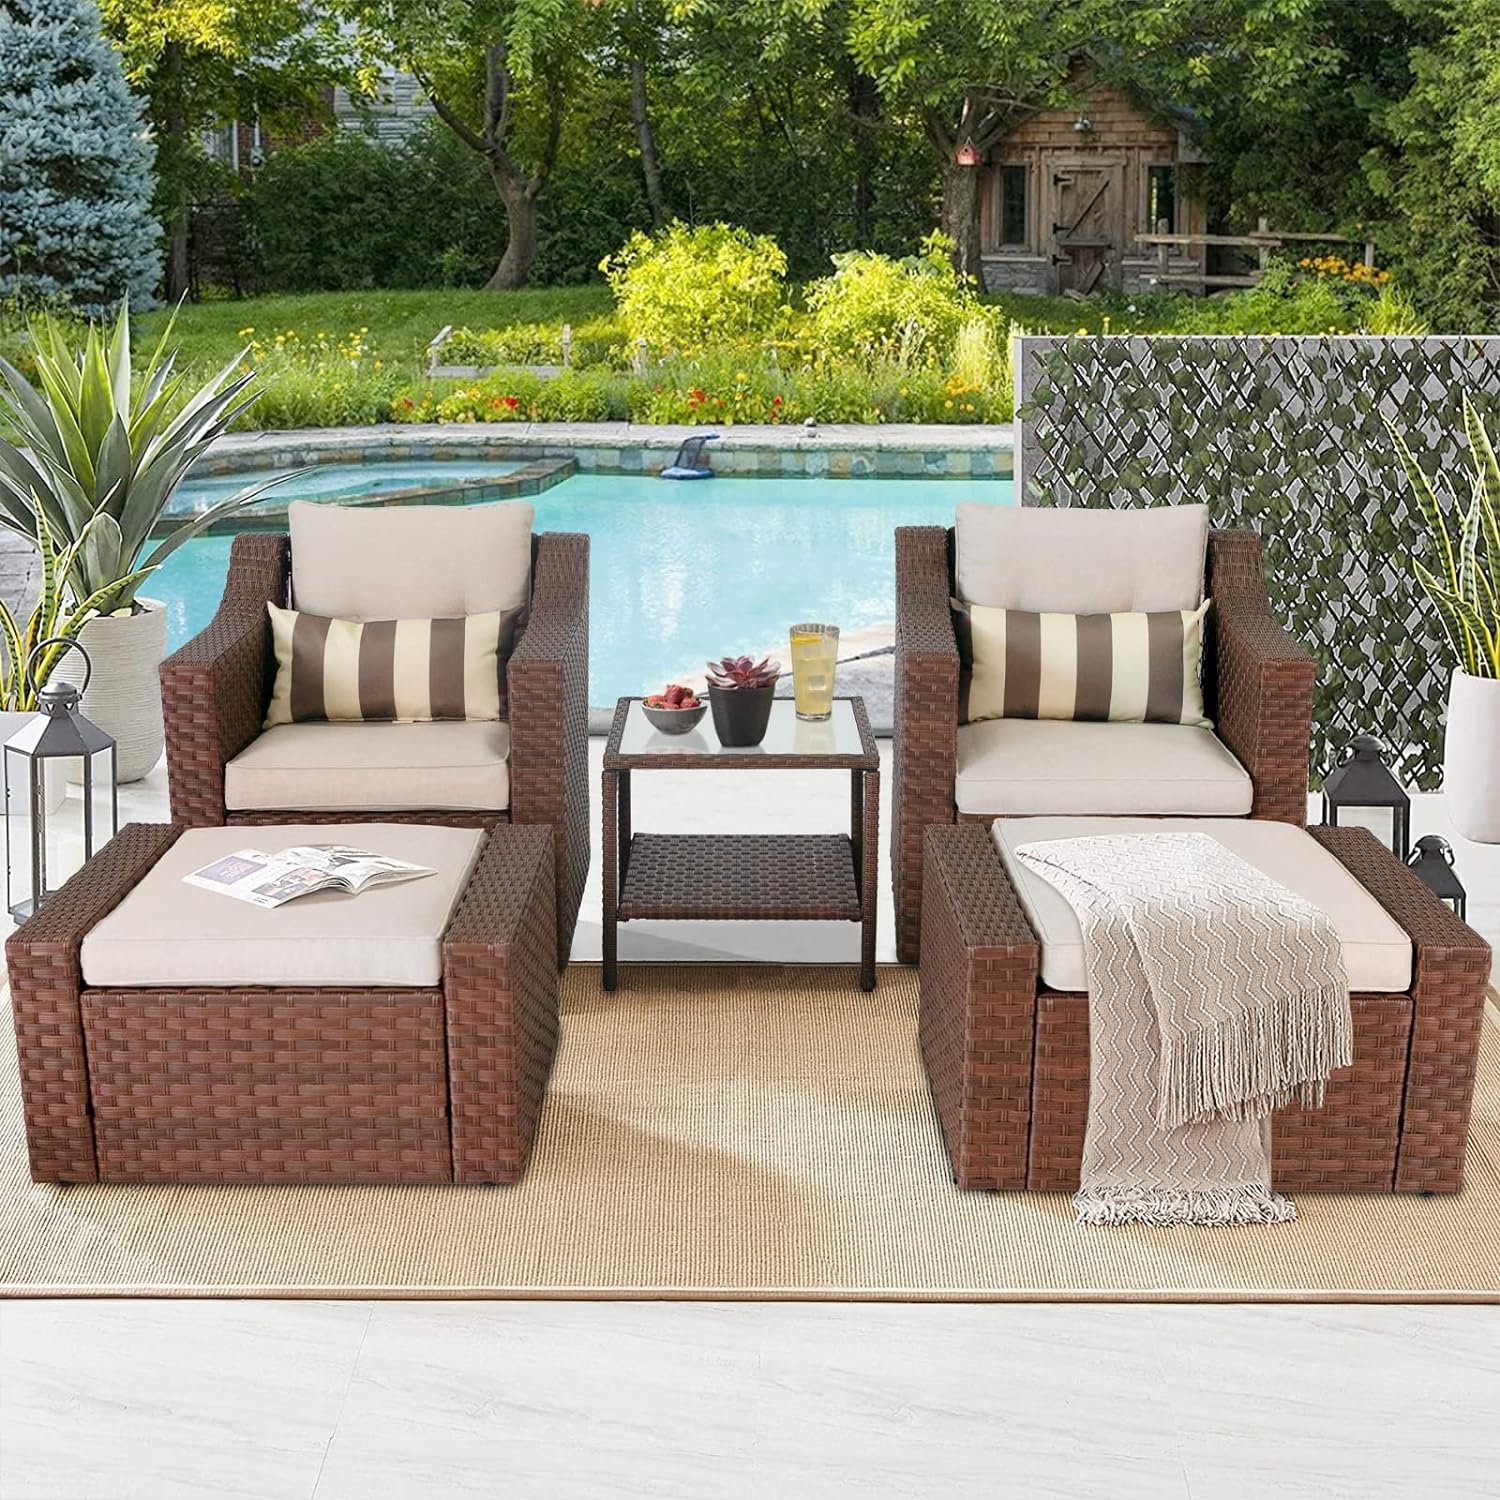 SOLAURA 5-Piece Outdoor Furniture Set Patio Wicker Conversation Set with Lounge Chairs & Ottomans, Brown - image 1 of 7